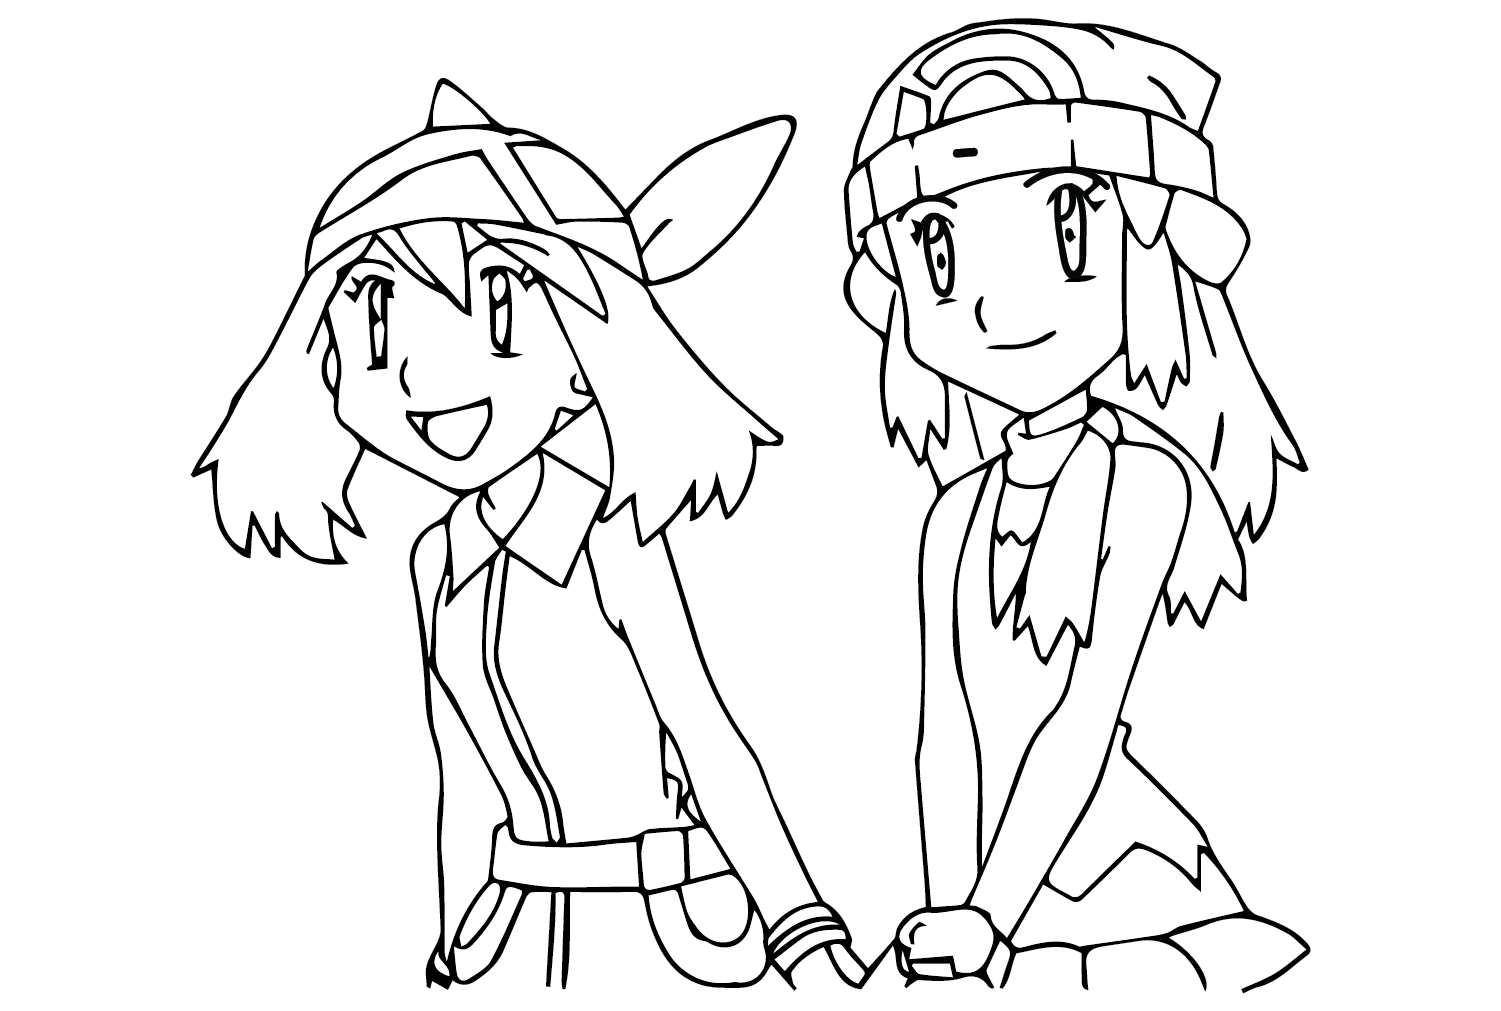 Coloring Pages Pokemon May Dawn from May Pokemon